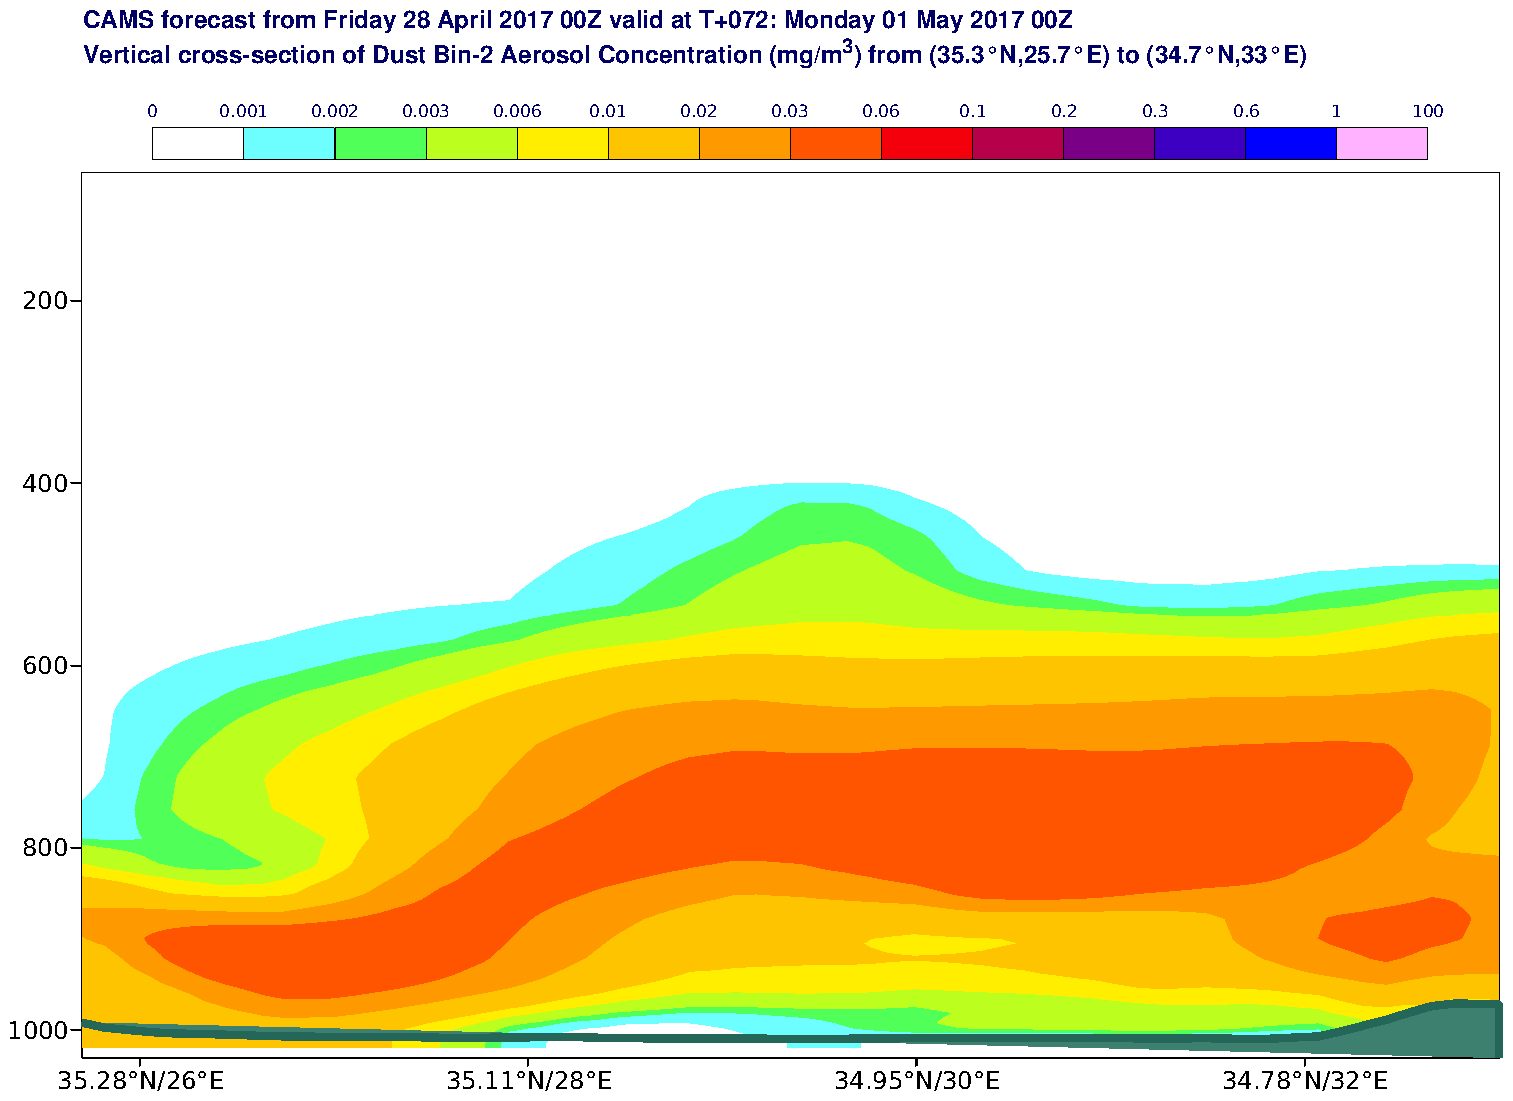 Vertical cross-section of Dust Bin-2 Aerosol Concentration (mg/m3) valid at T72 - 2017-05-01 00:00